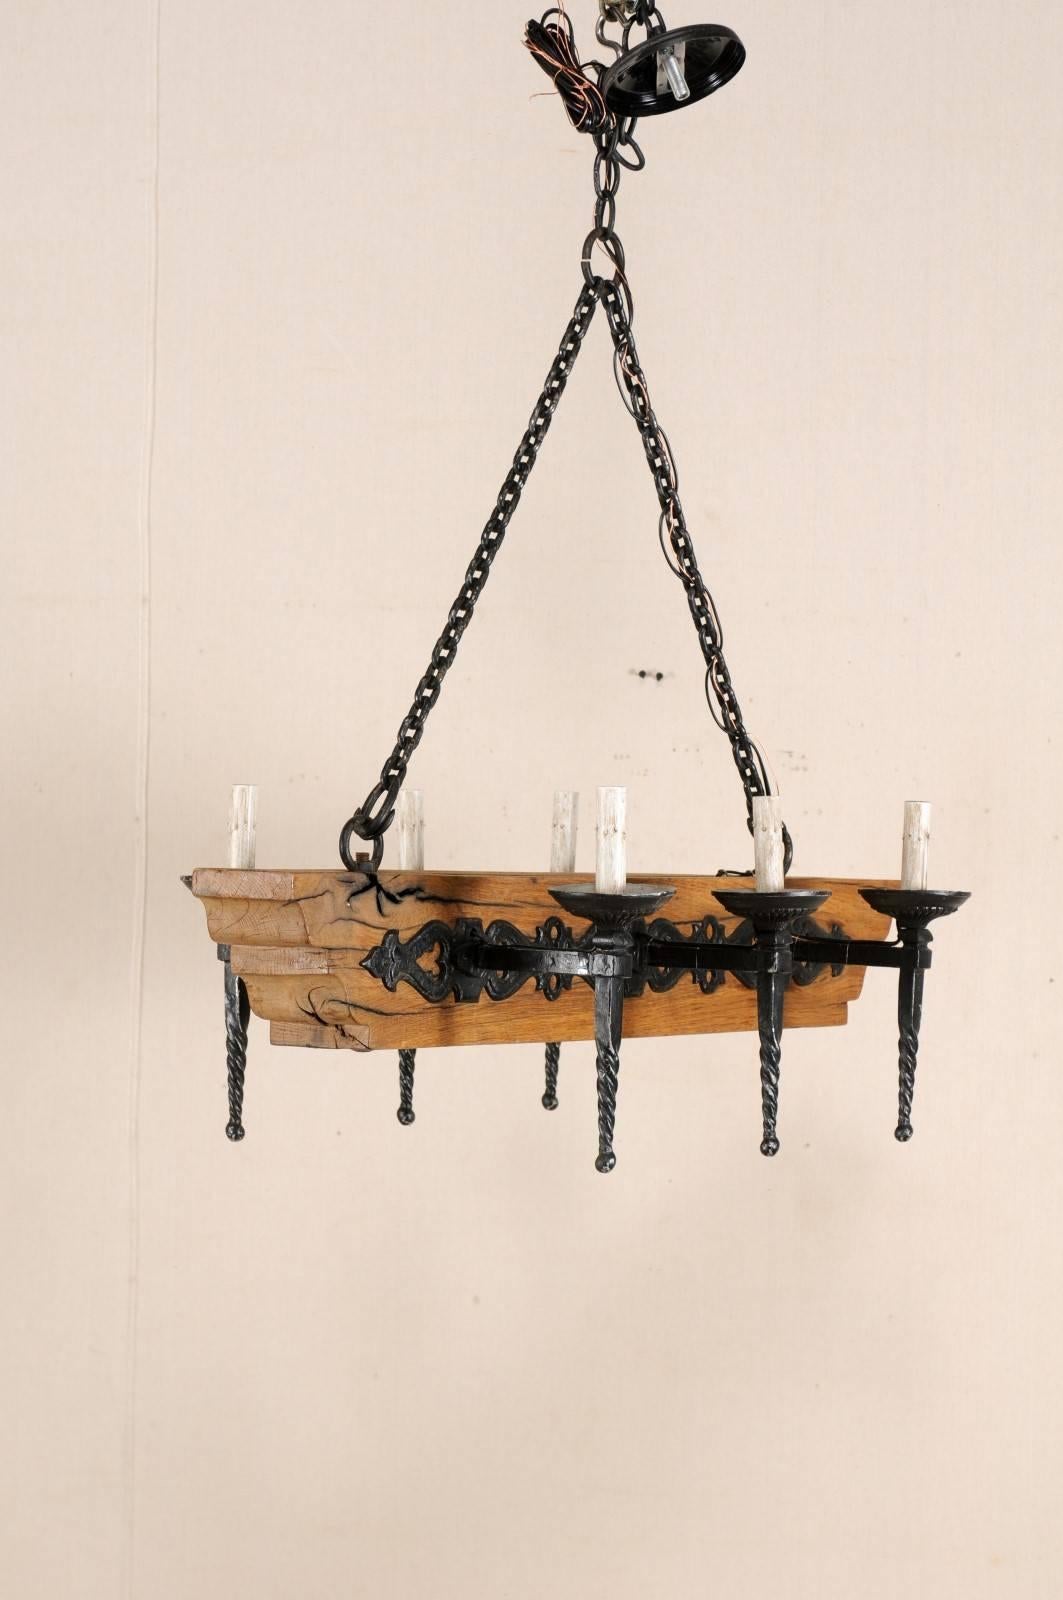 A French six-light wooden beam and iron arms chandelier from the mid-20th century. This vintage French chandelier has a central wooden beam with six torch-style iron arms, three at each opposing side. The six torch light arms with spiralized posts